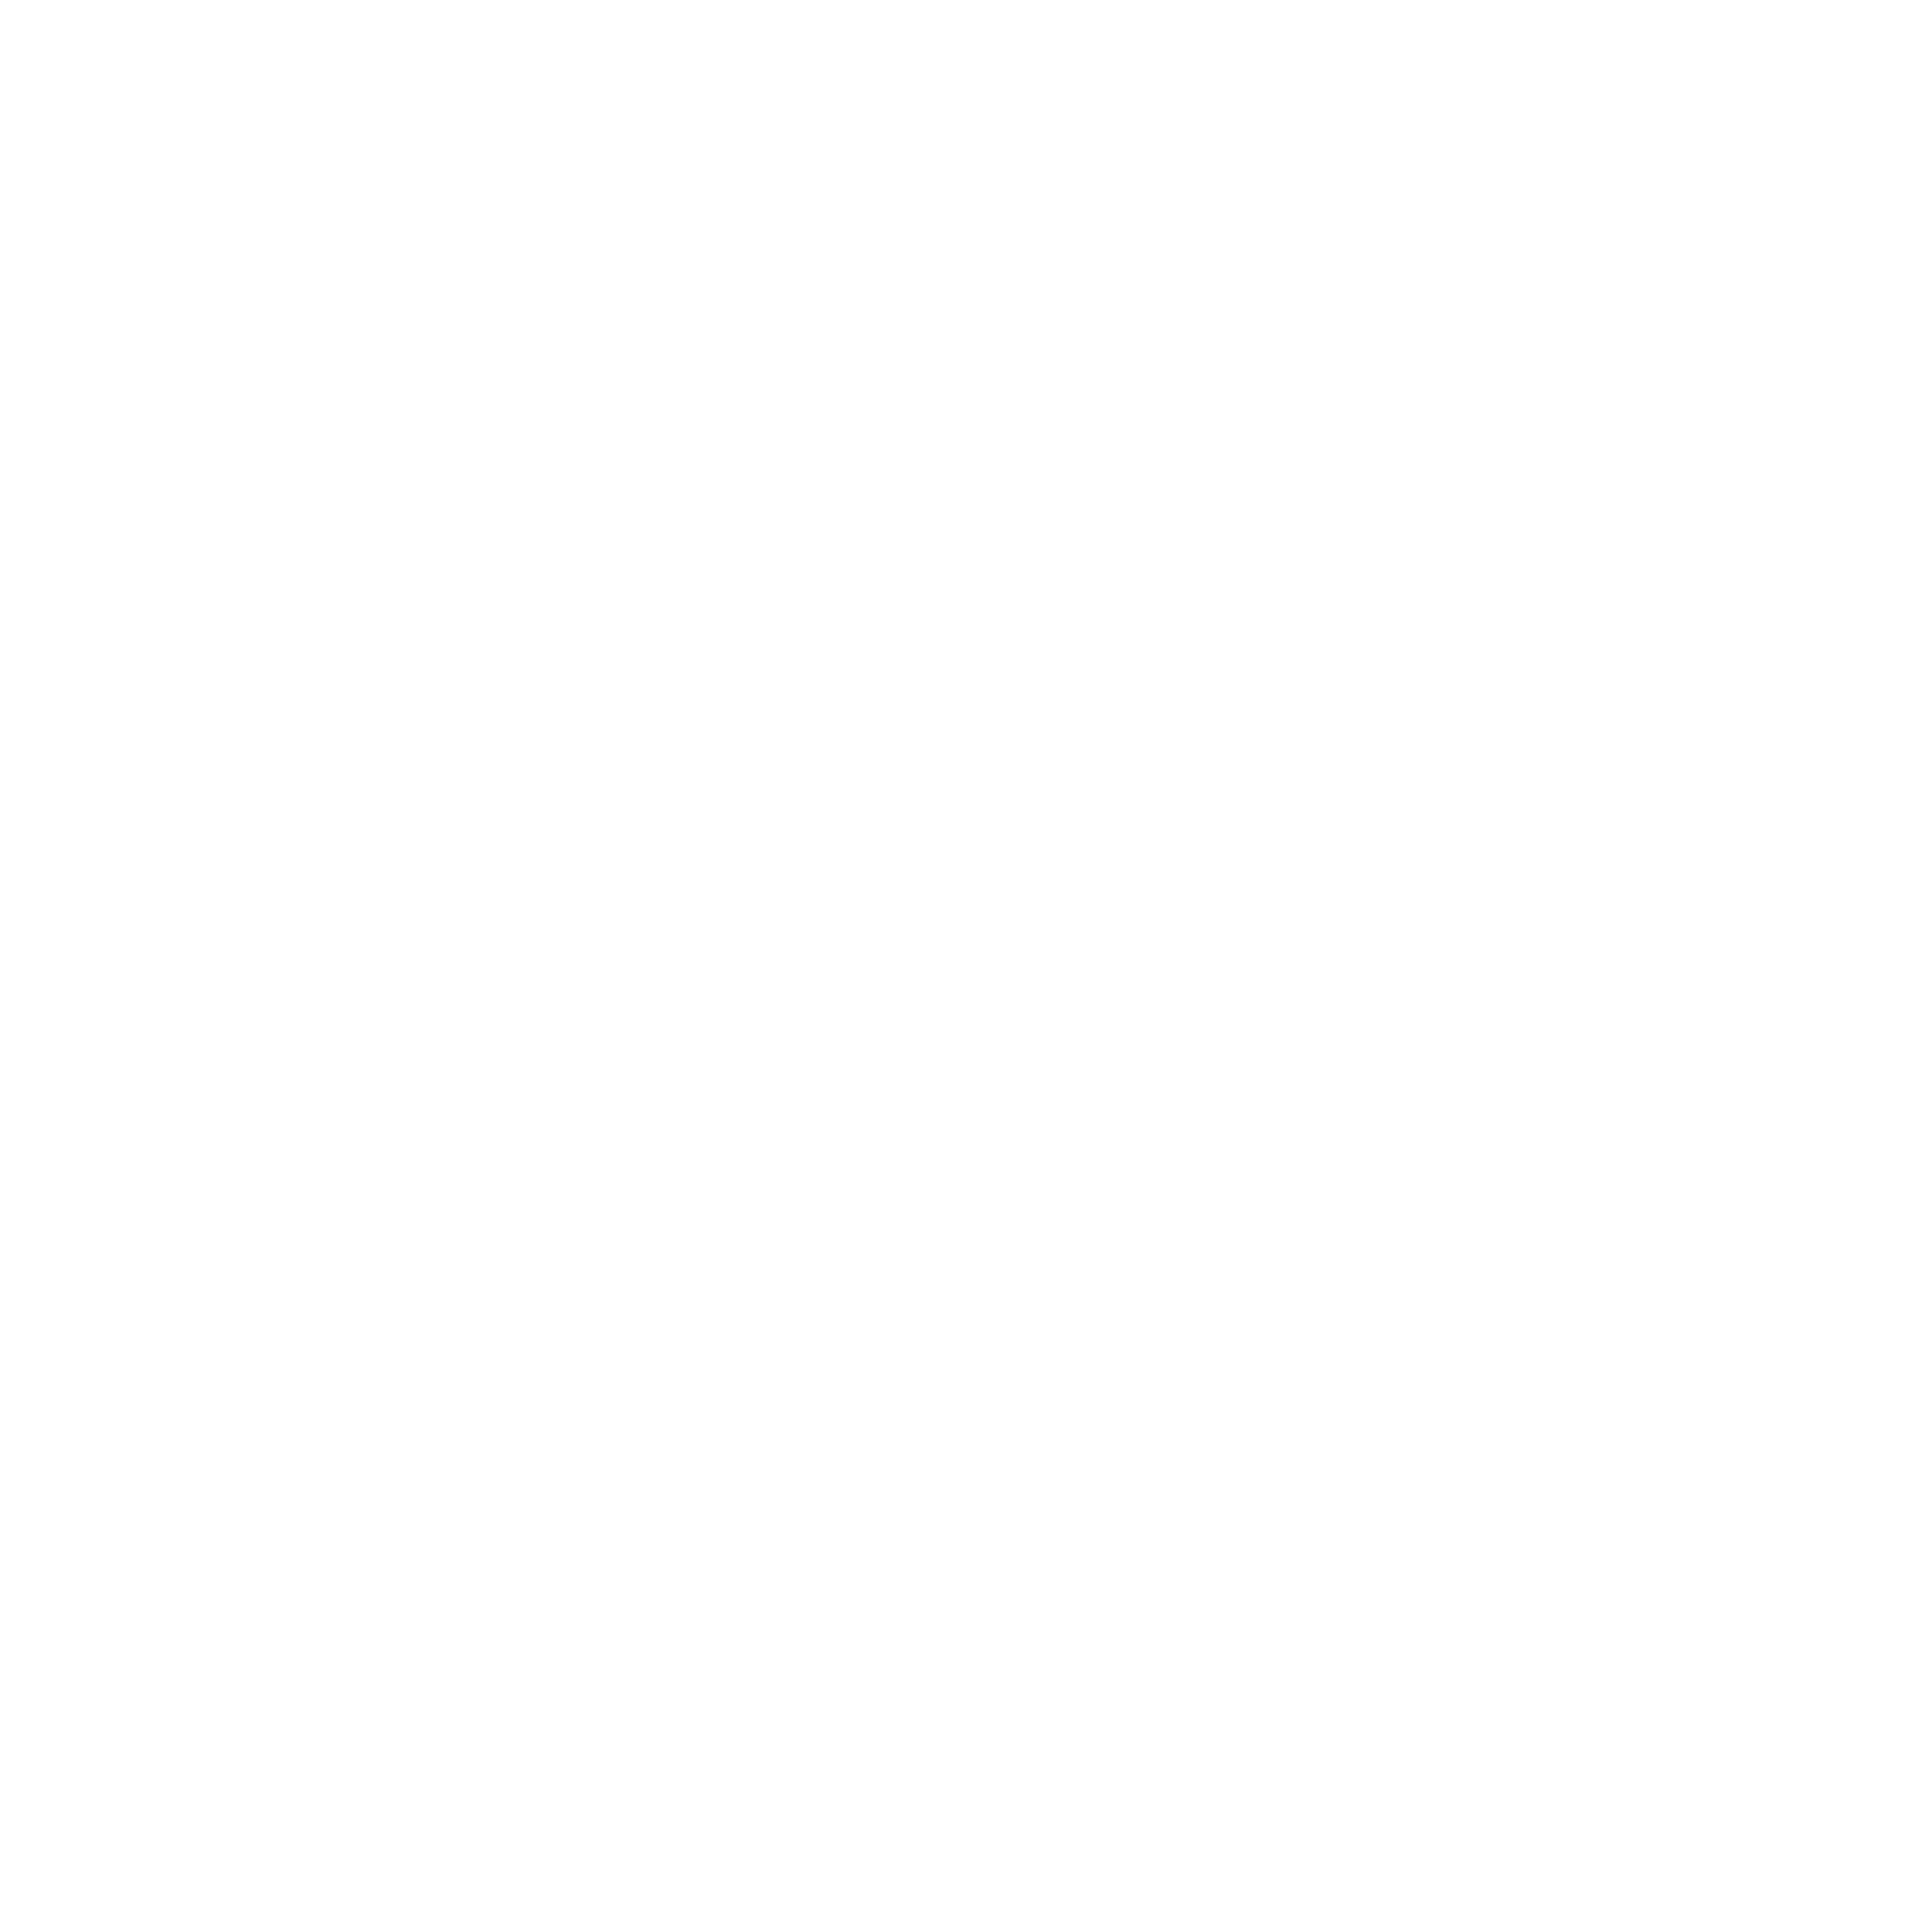 EZHIL INFRA AND ENTERPRISES PRIVATE LIMITED